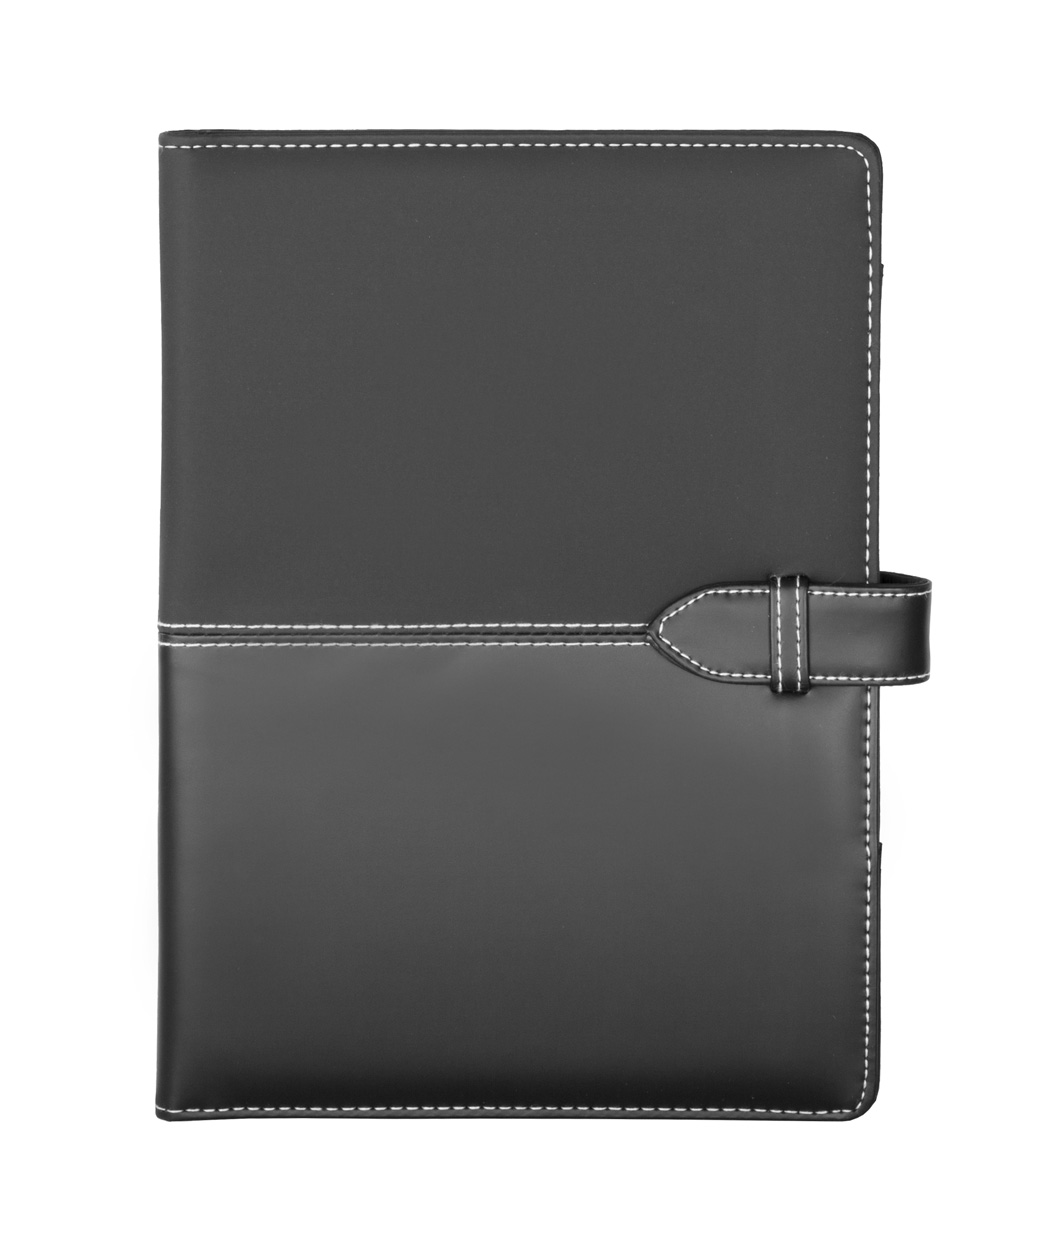 Conference folders DUOTONE A5 PU leather, format A5 - black